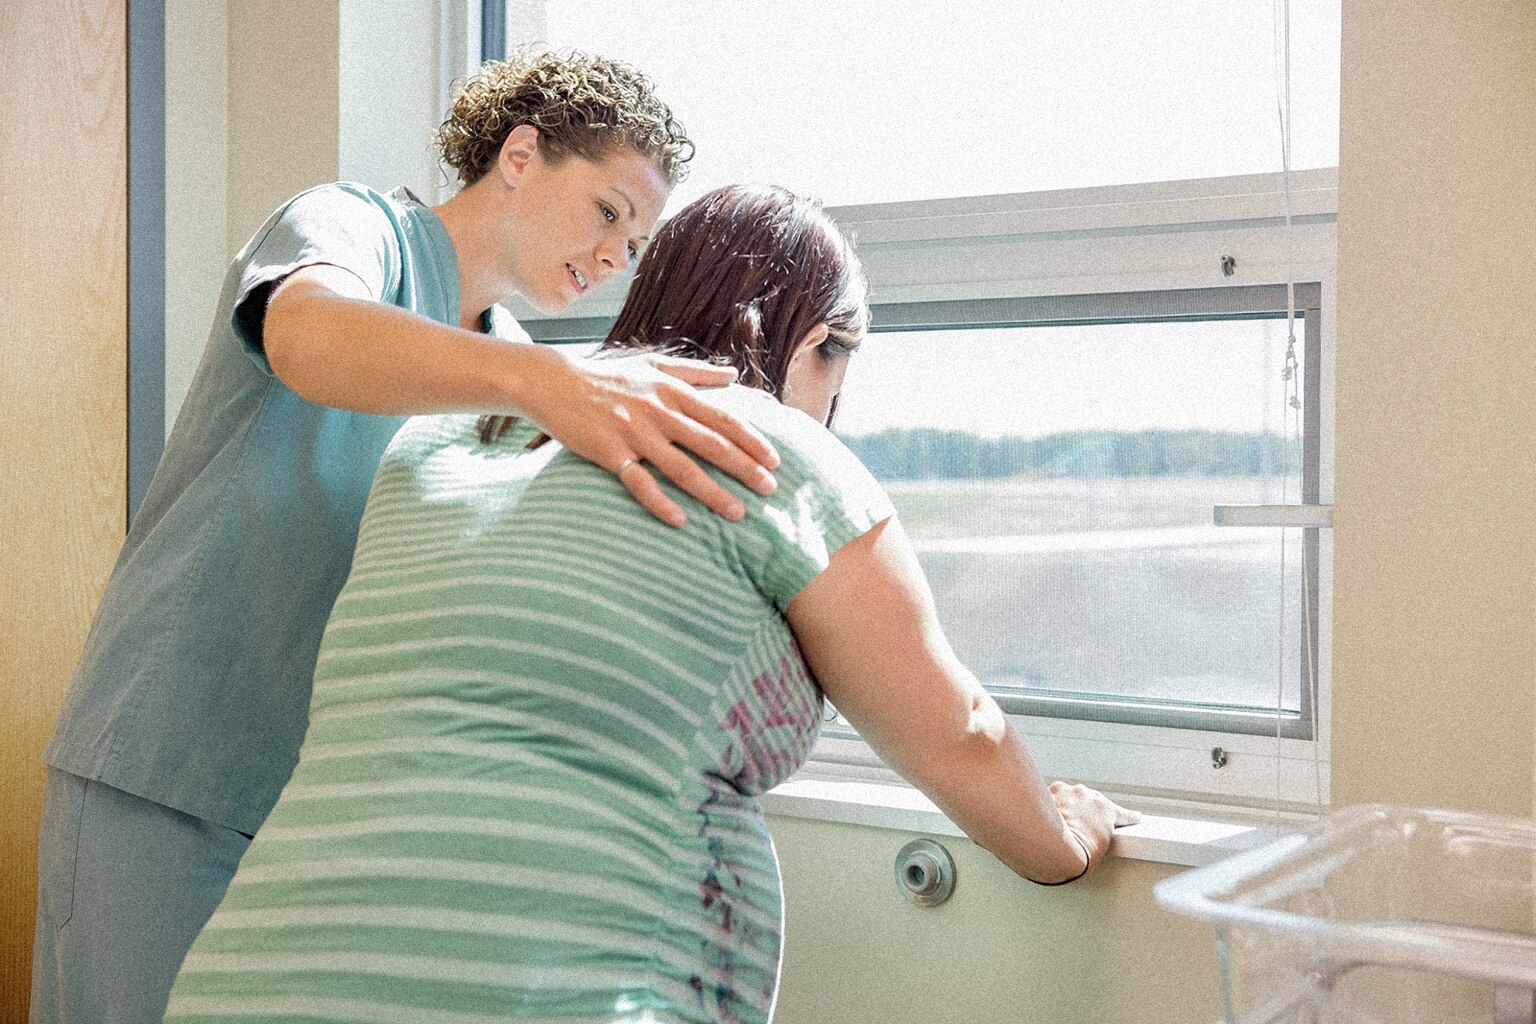 A midwife stands next to a patient at a window and helps her breath during labor contractions.